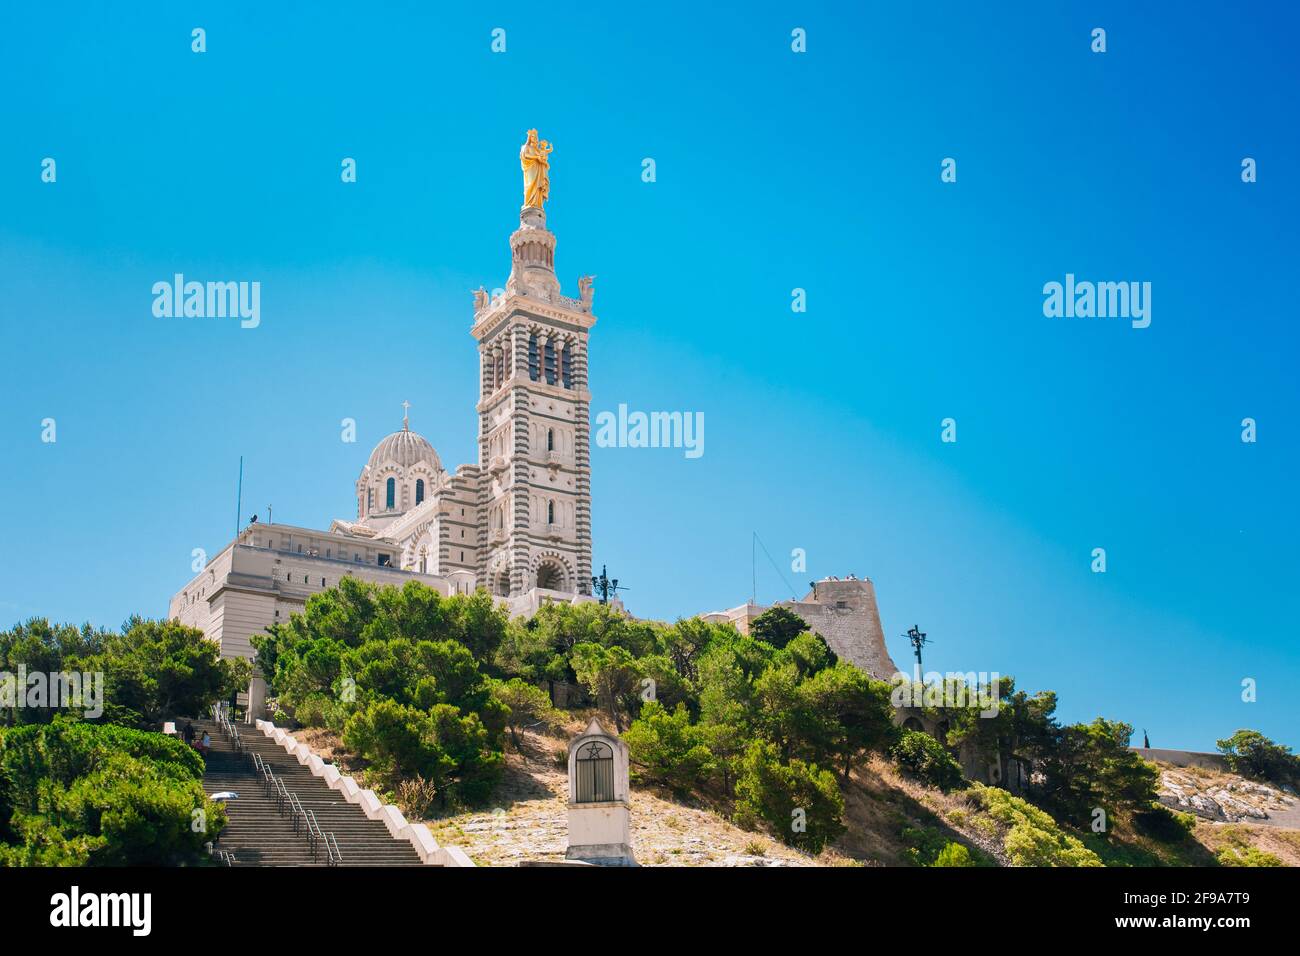 Marseille, France. Catholic Basilica of Our Lady of the Guard or Notre Dame De La Garde church at hill in Marseille, France. Sunny summer sky Stock Photo